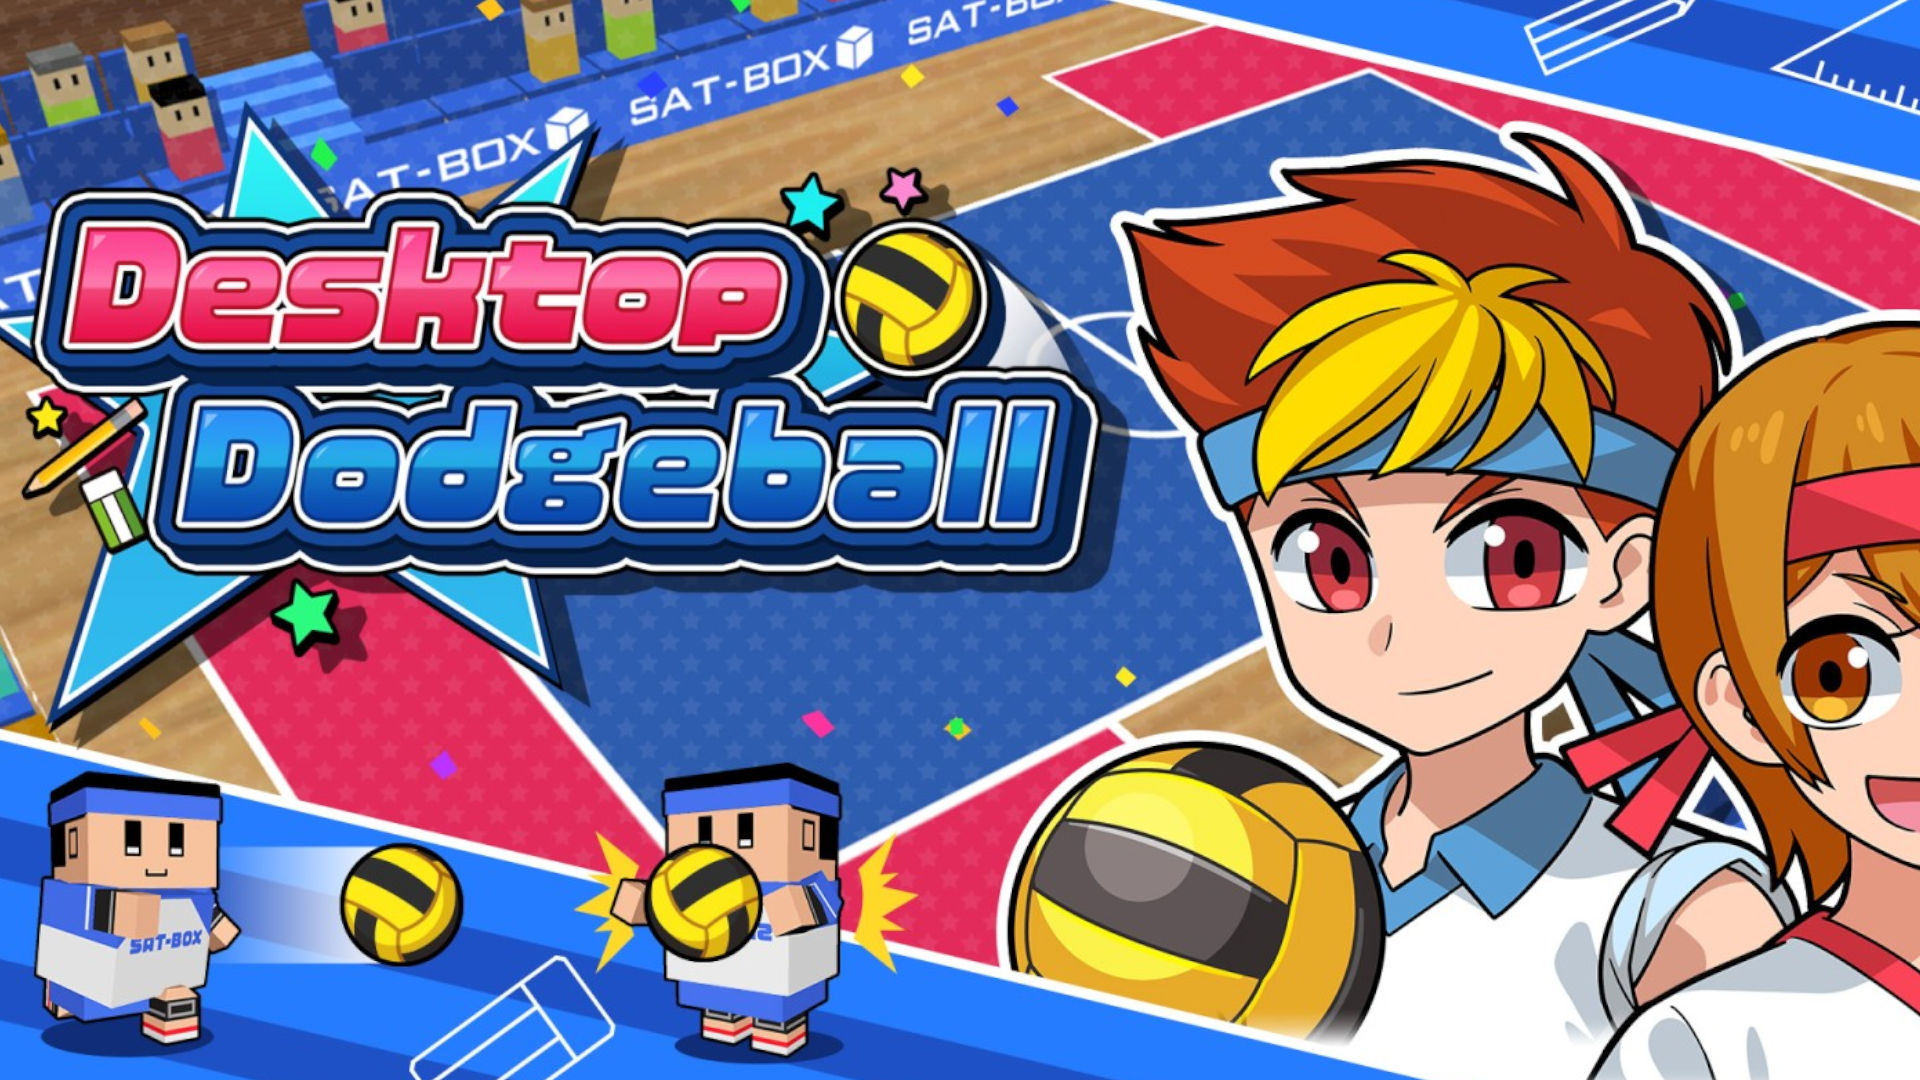 Desktop Dodgeball cover art with mini players and key art